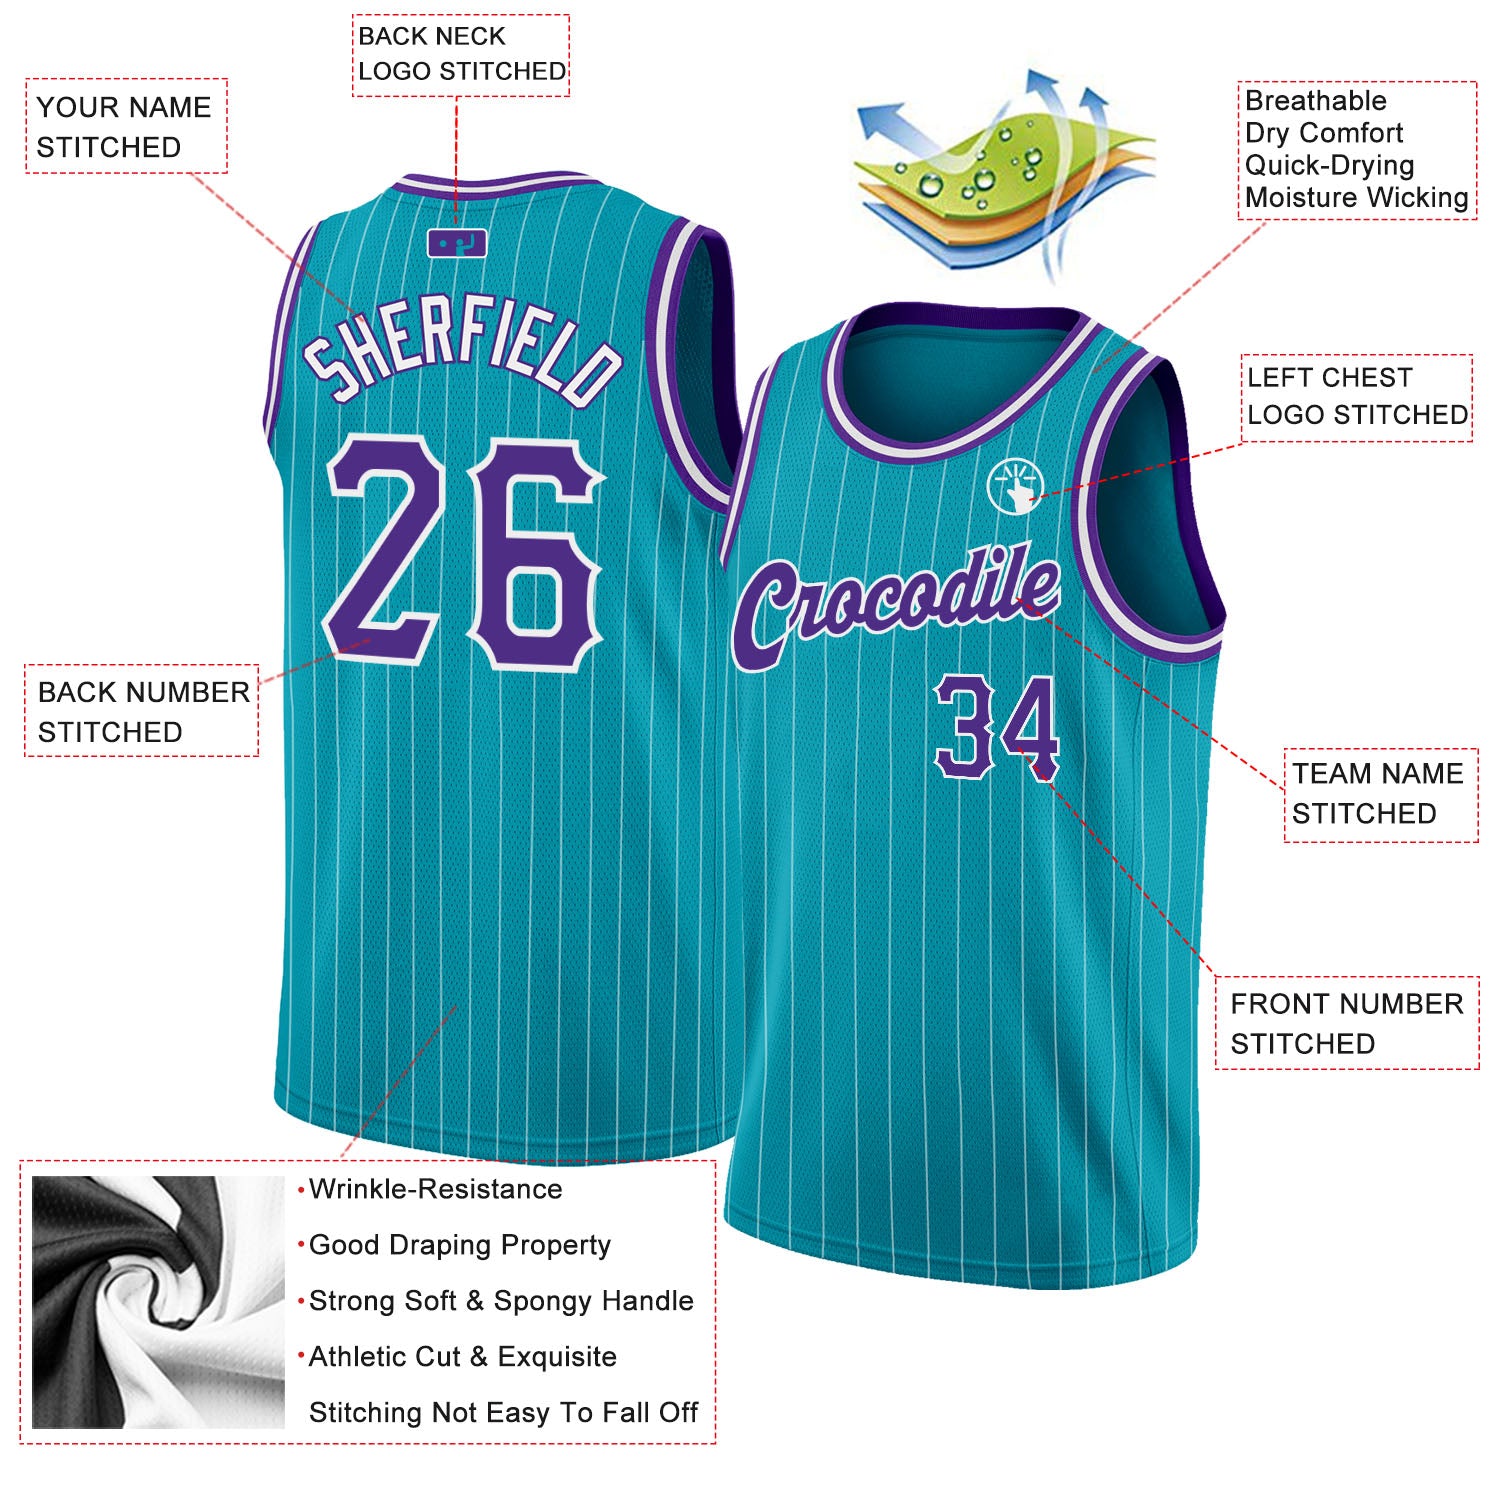 Charlotte Hornets to wear white pinstripe throwback uniforms